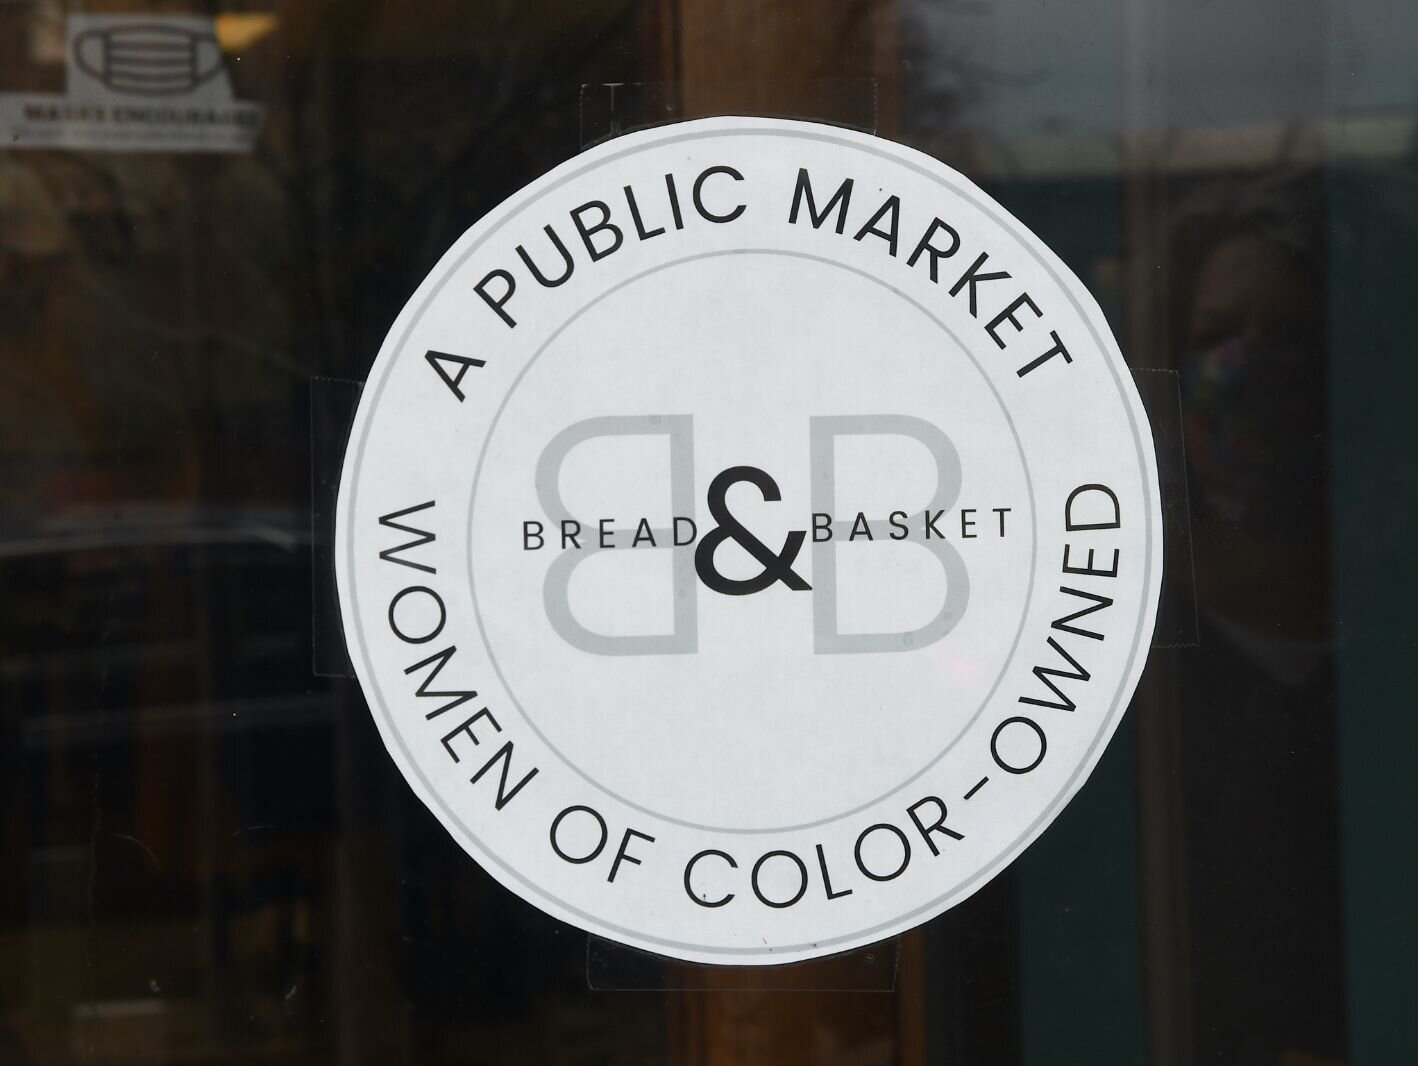 Logo on the front door Bread and Basket public market, at 38 E. Michigan in downtown Battle Creek.